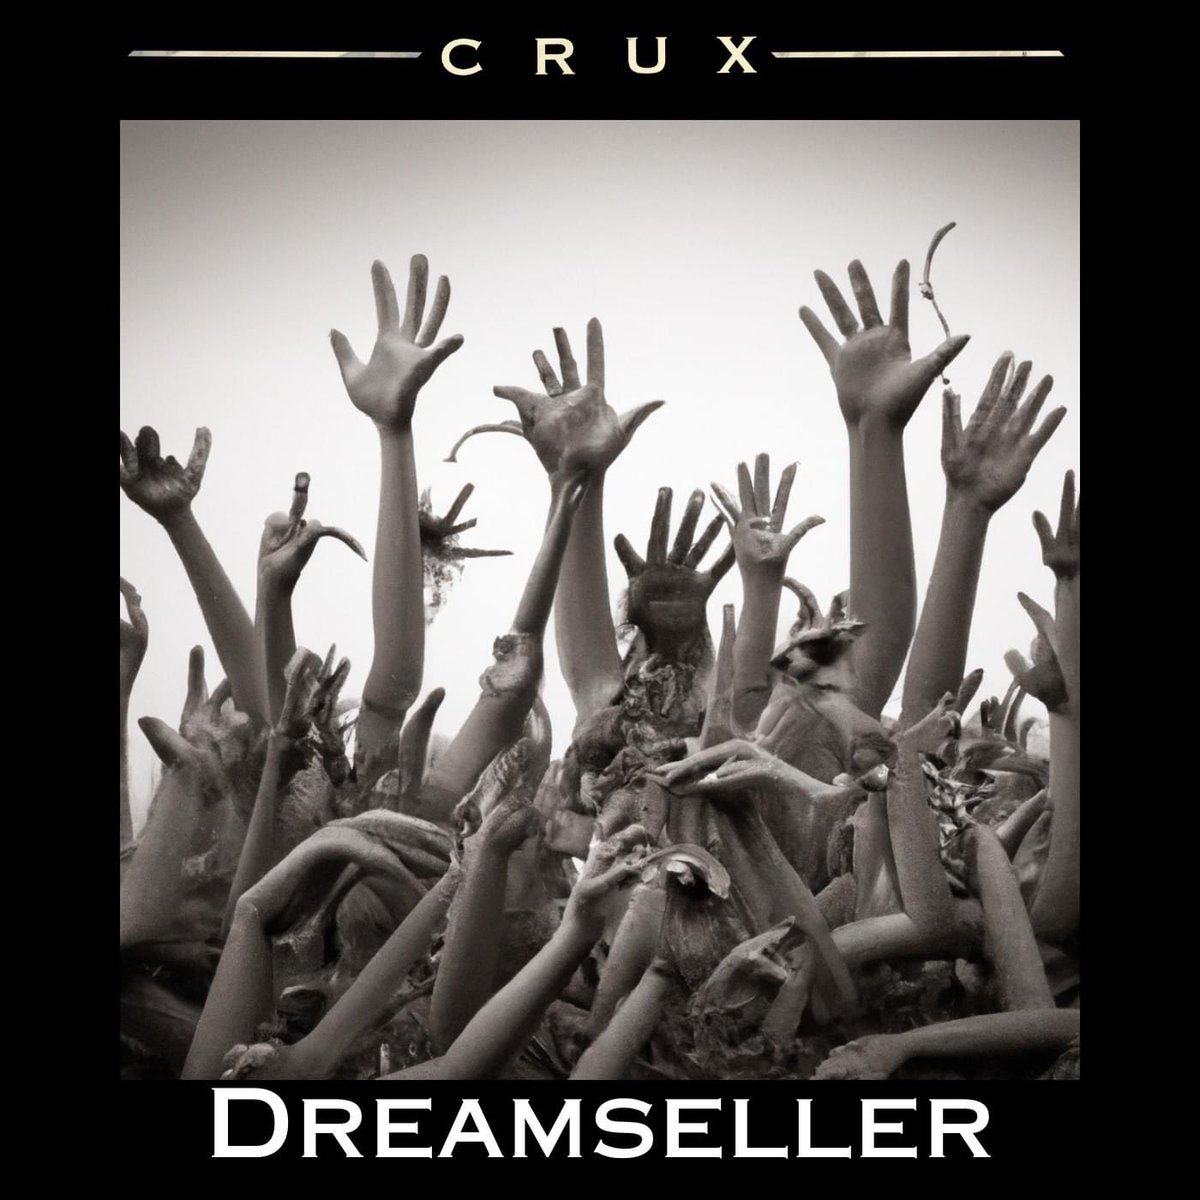 🚨 OUT NOW! 🚨 Our new single, DREAMSELLER, is now available on all streaming platforms. Head to our linktree: linktr.ee/cruxnewcastle We've had some really positive feedback playing this tune at our most recent gigs, let us know what you think of Dreamseller in the replies 👇